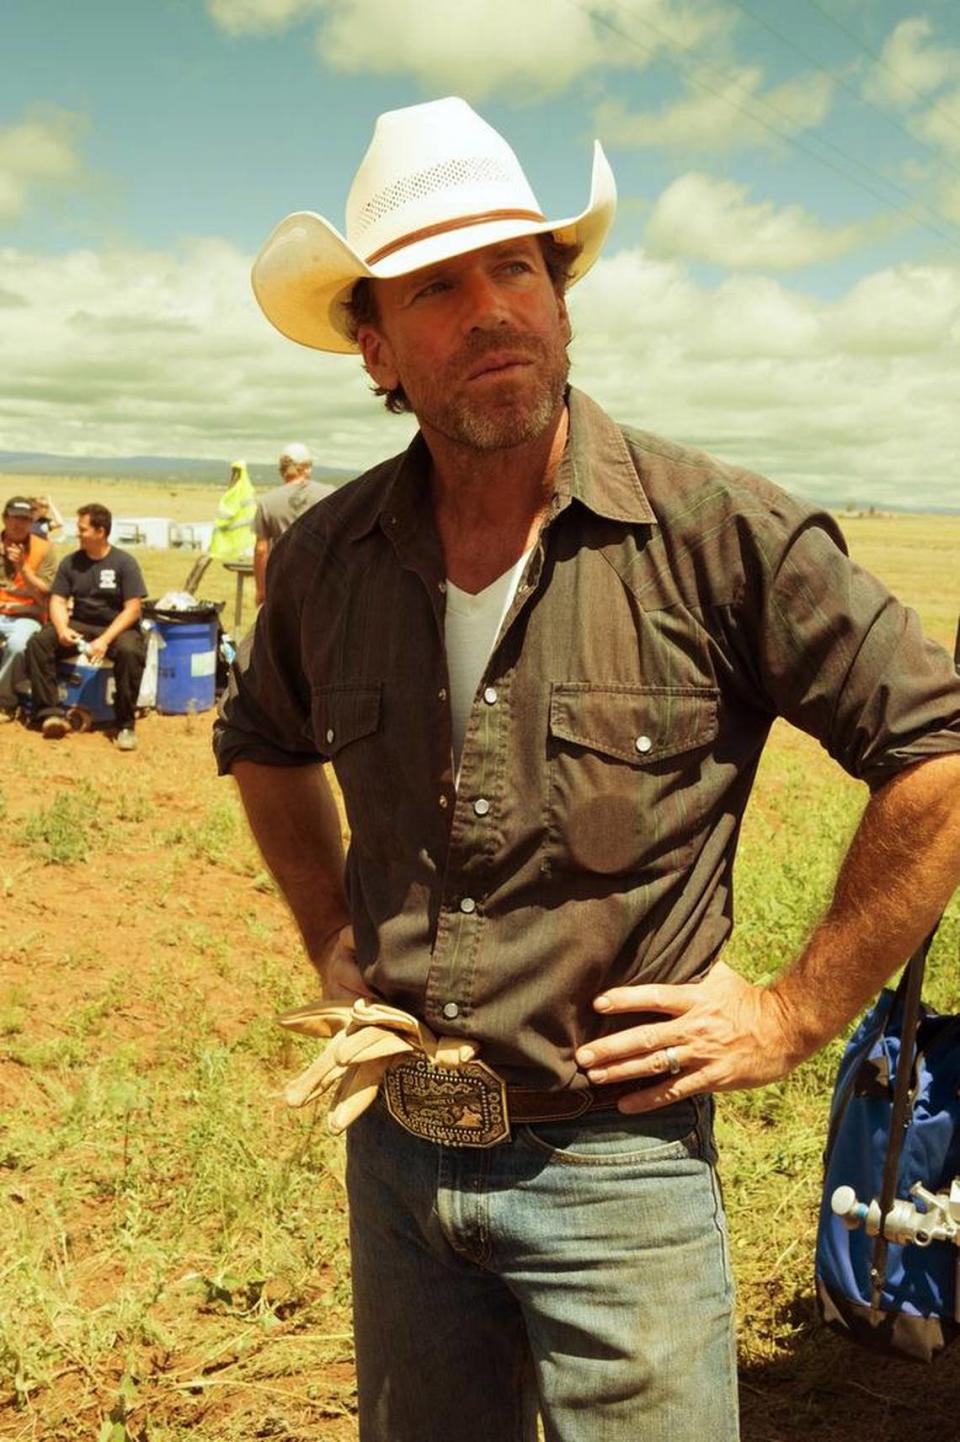 Screenwriter Taylor Sheridan on the set of his 2016 film “Hell or High Water.”